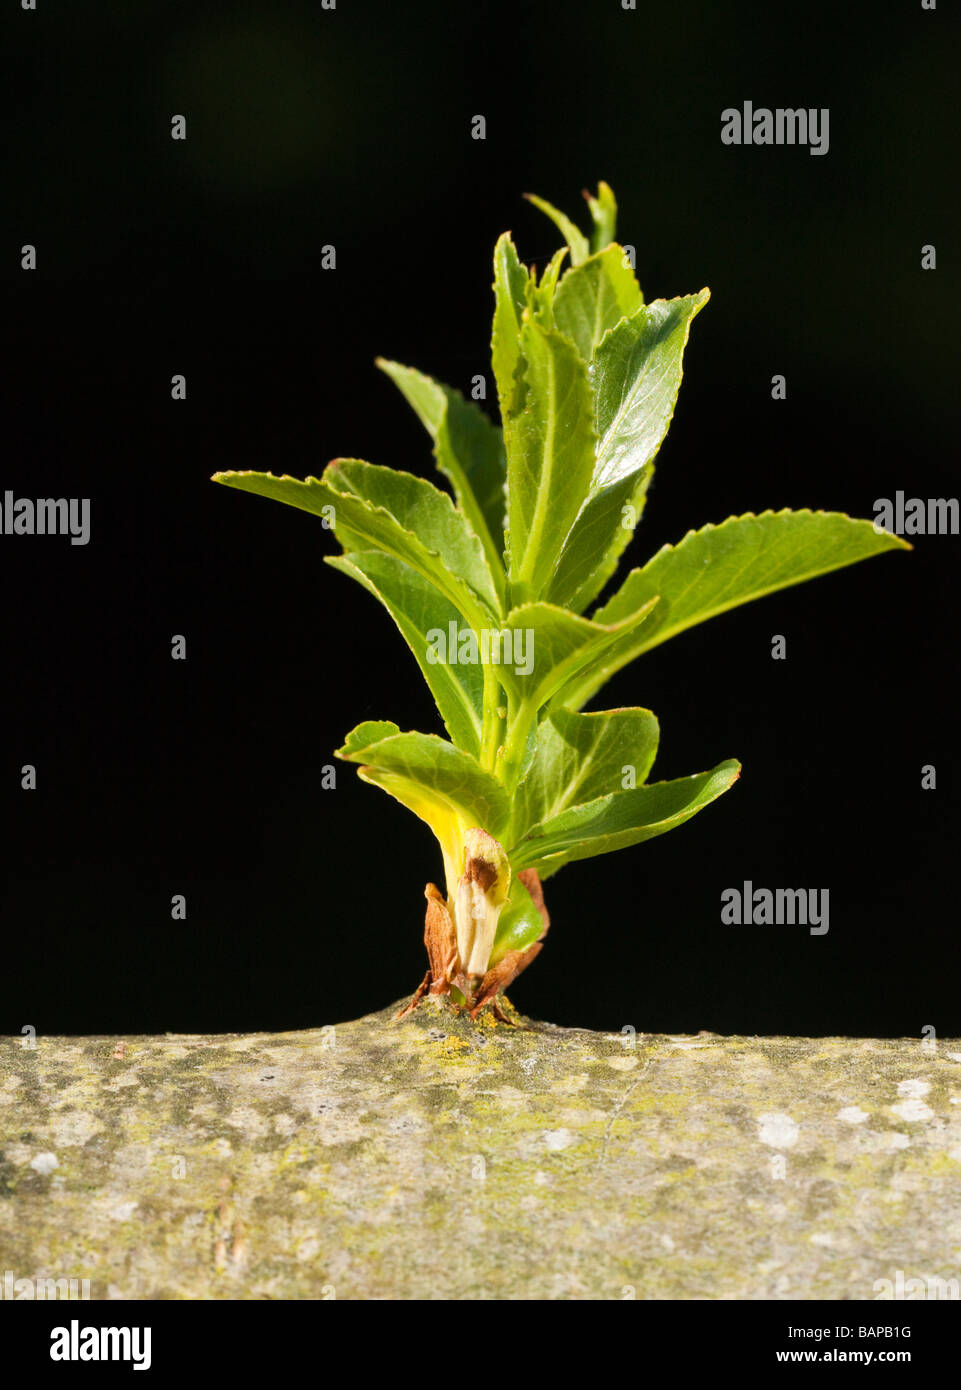 green shoots growing from a willow tree branch Stock Photo